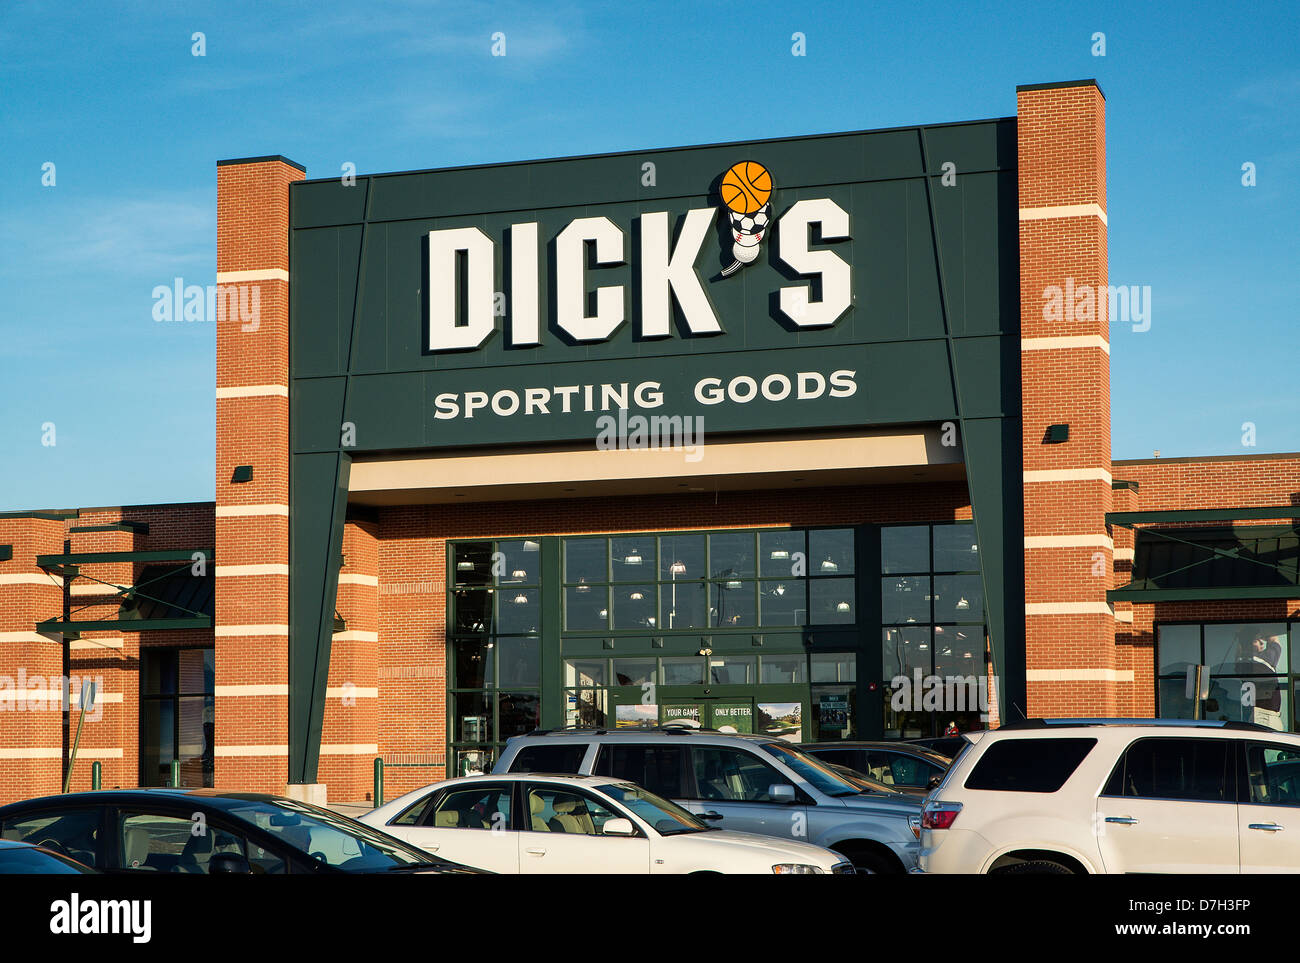 Dick's Sporting Goods store, New Jersey, USA Banque D'Images